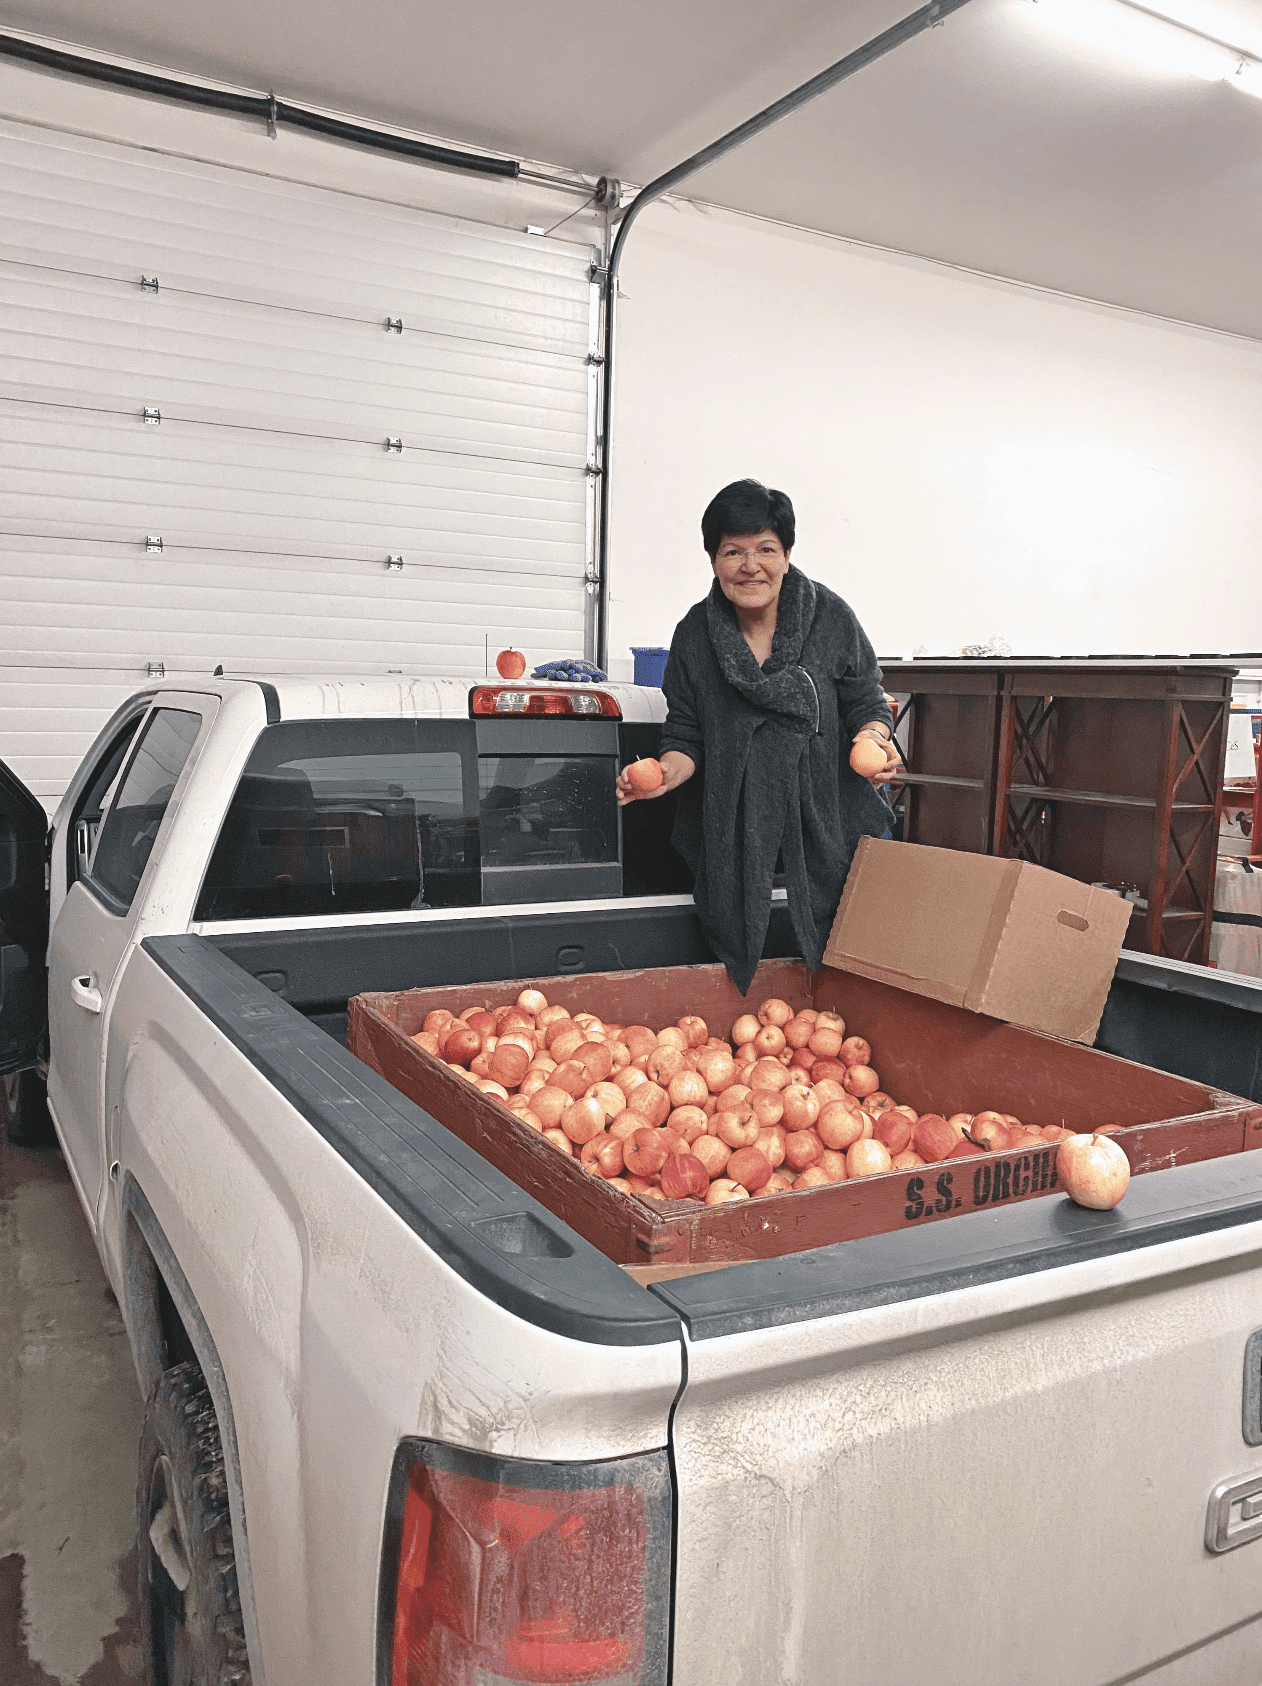 Vicky Ford, canning workshop coordinator in Maskwacis, Alberta, Canada, surveys more than 180 kilograms (400 pounds) of apples. [Photo: Canadian Adventist Messenger]